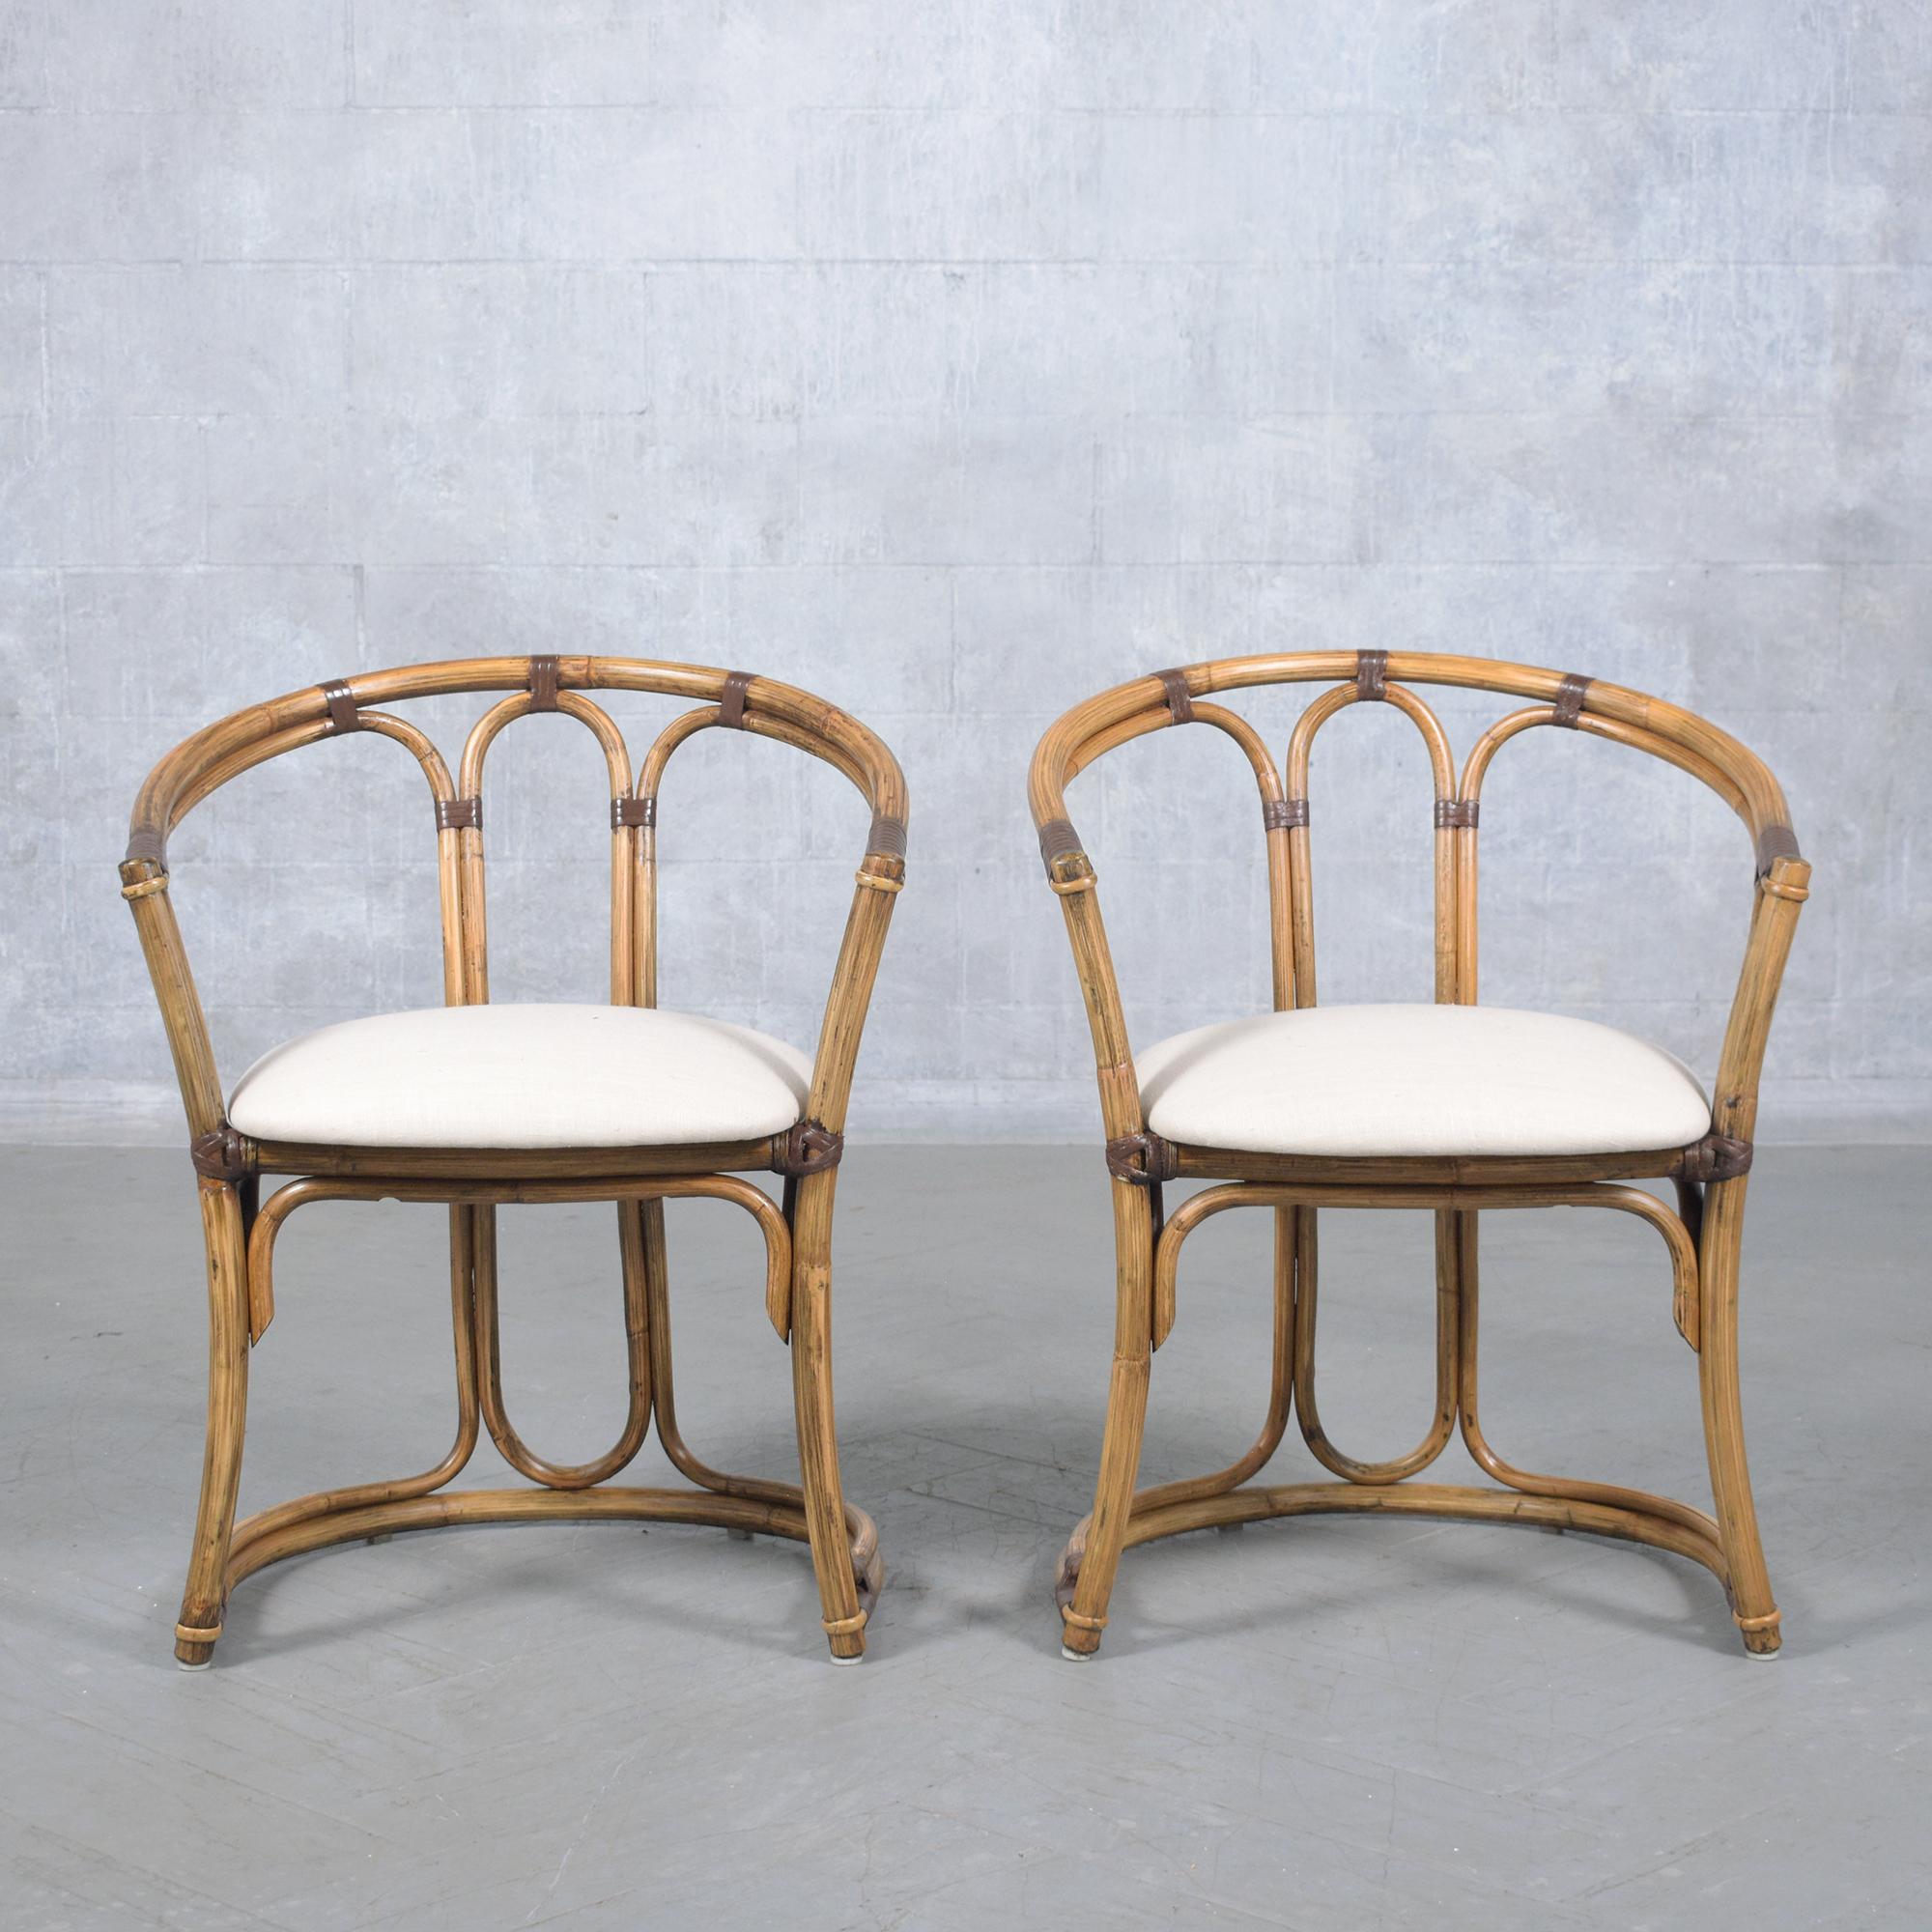 Discover the charm of our pair of vintage bamboo barrel chairs, exquisitely crafted and fully restored by our in-house professionals. The pair of chairs feature a natural bamboo color accented with brown details and a protective satin lacquer